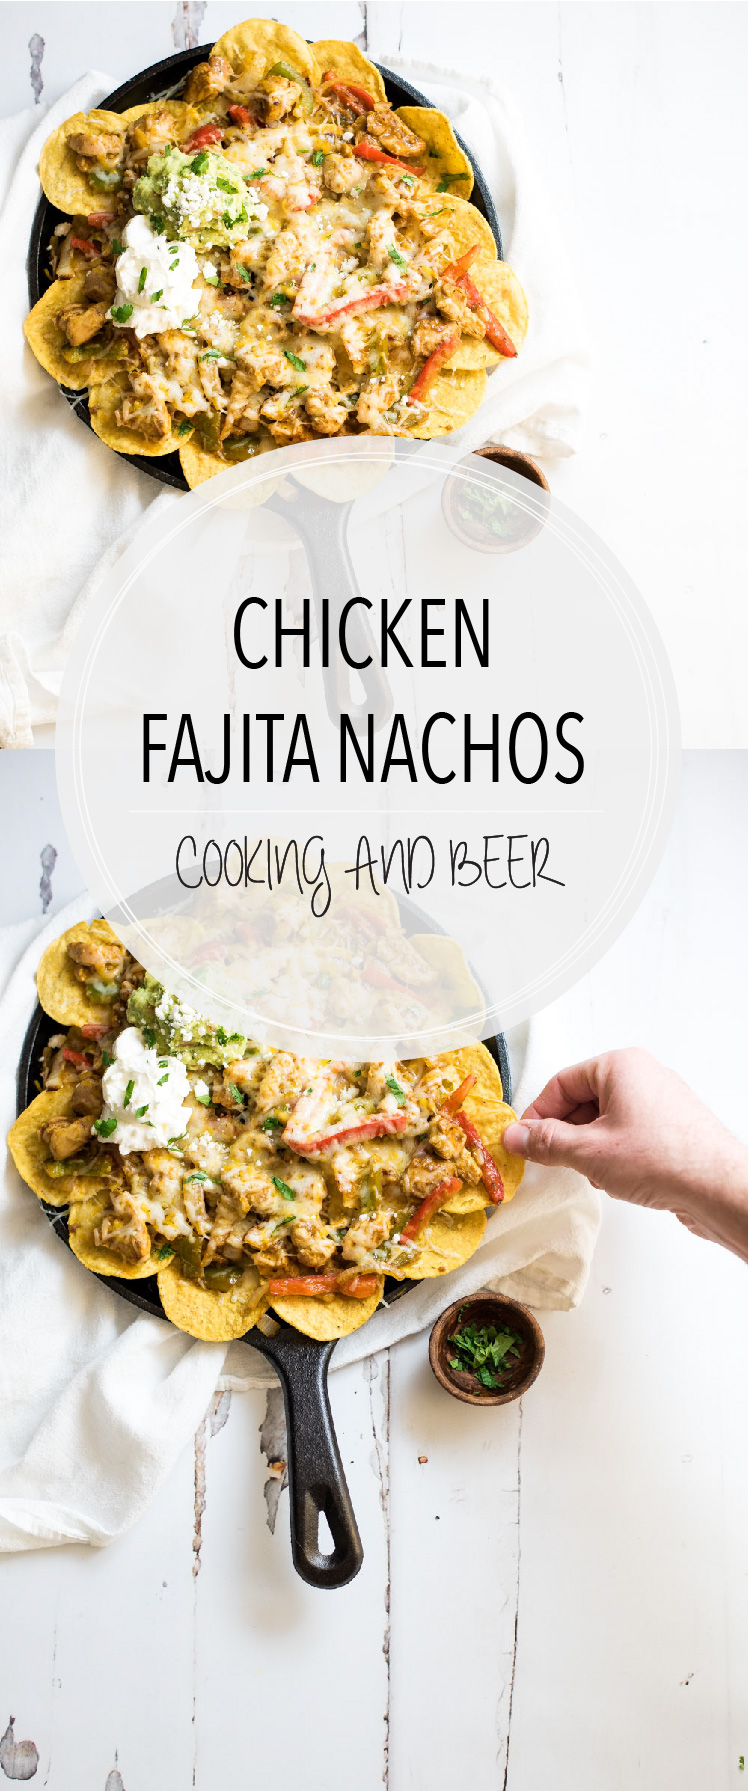 You can quickly elevate nachos with a few simple ingredient substitutions. These chicken fajita nachos are perfect for game day and are the perfect bites!